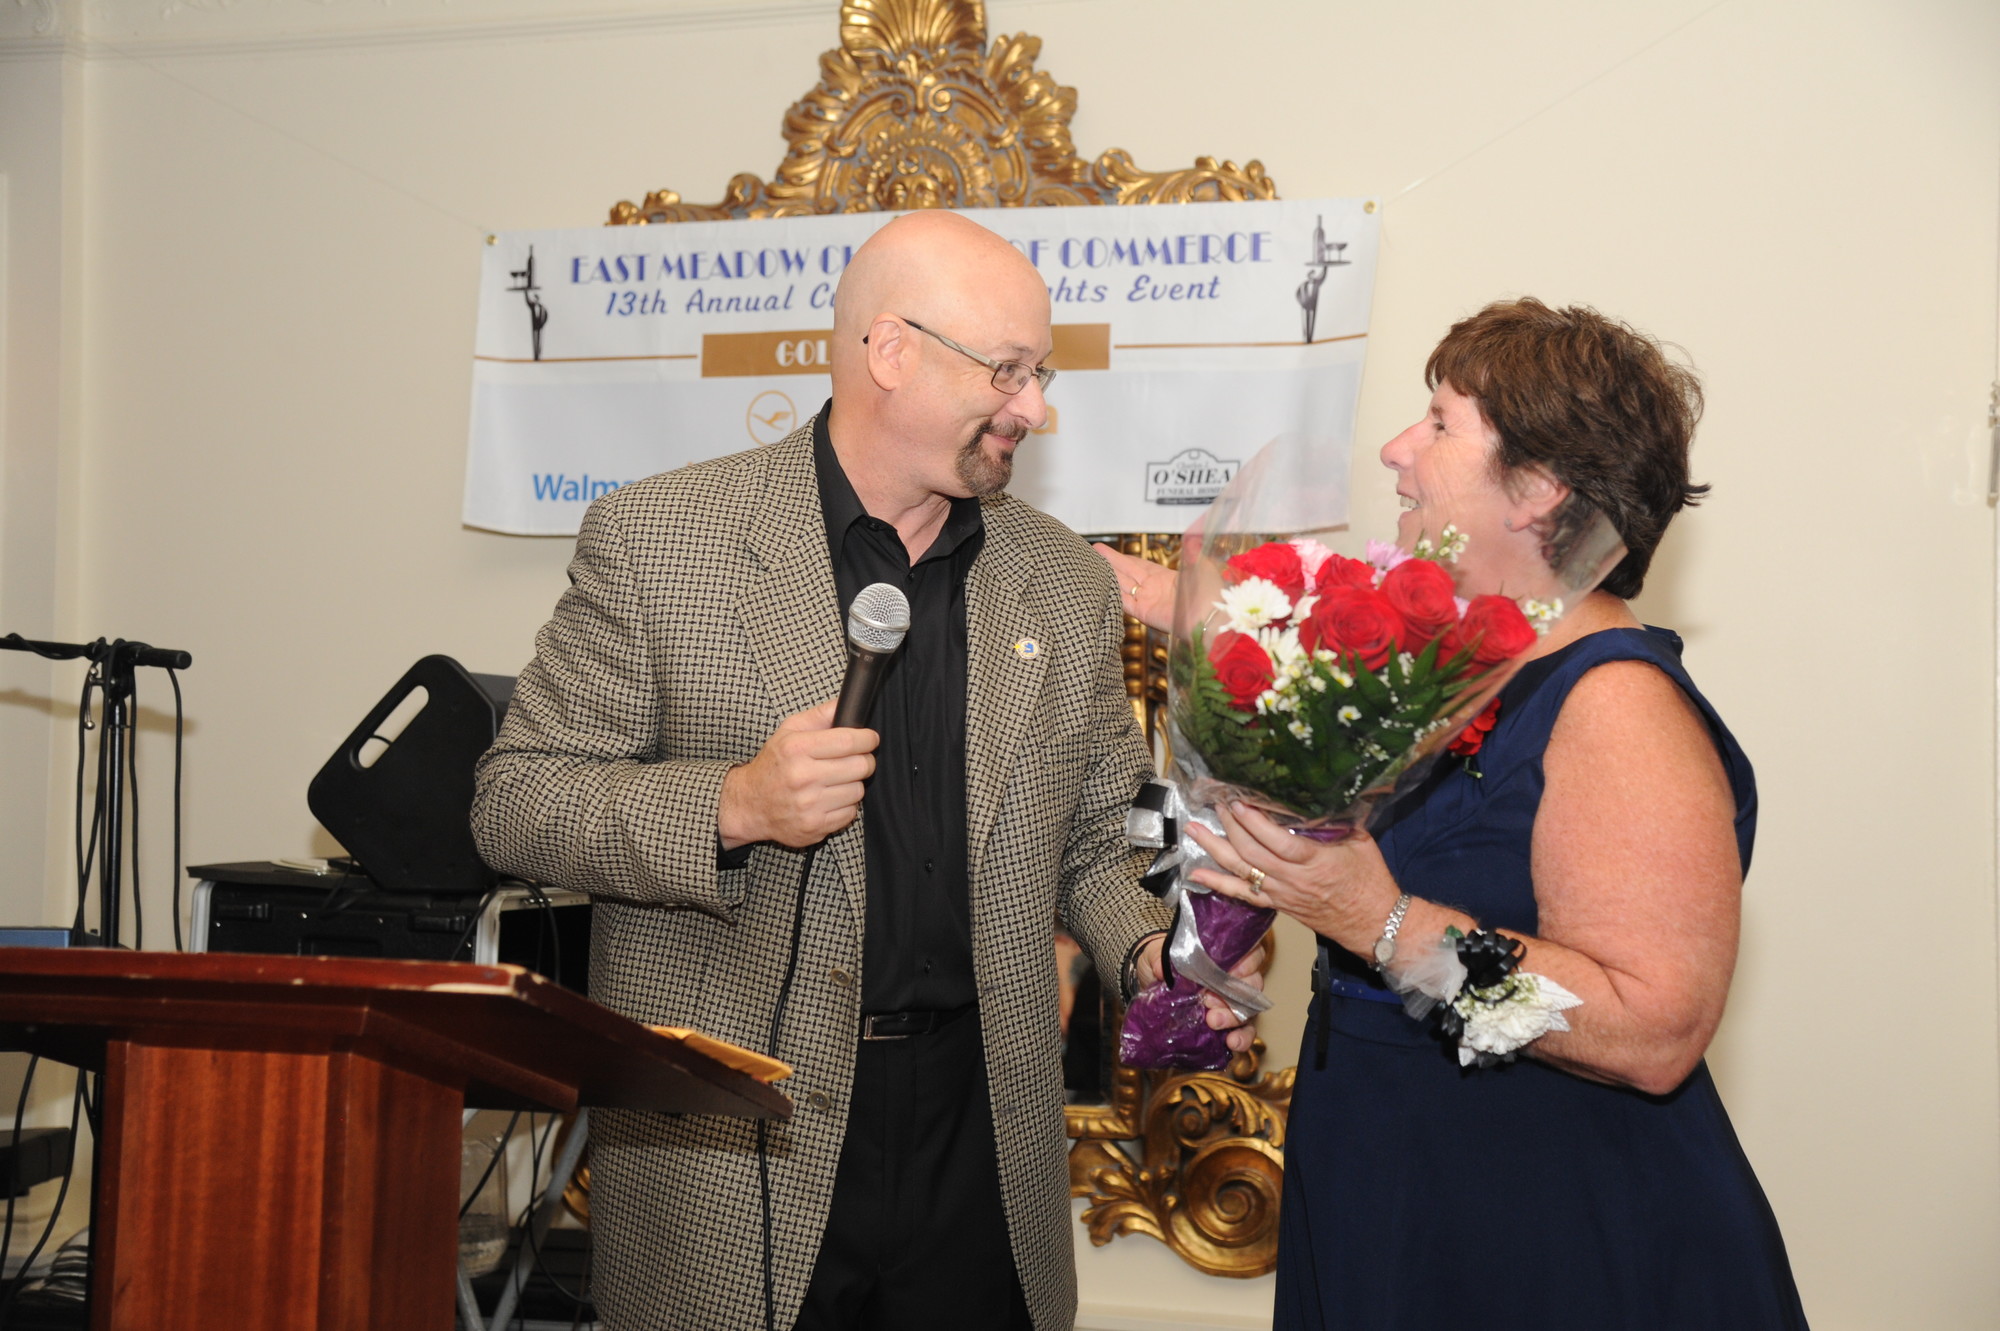 Chamber President Mitchell Allen handed flowers to Linda Walsh, of the Nassau University Medical Center, who is retiring after 33 years.